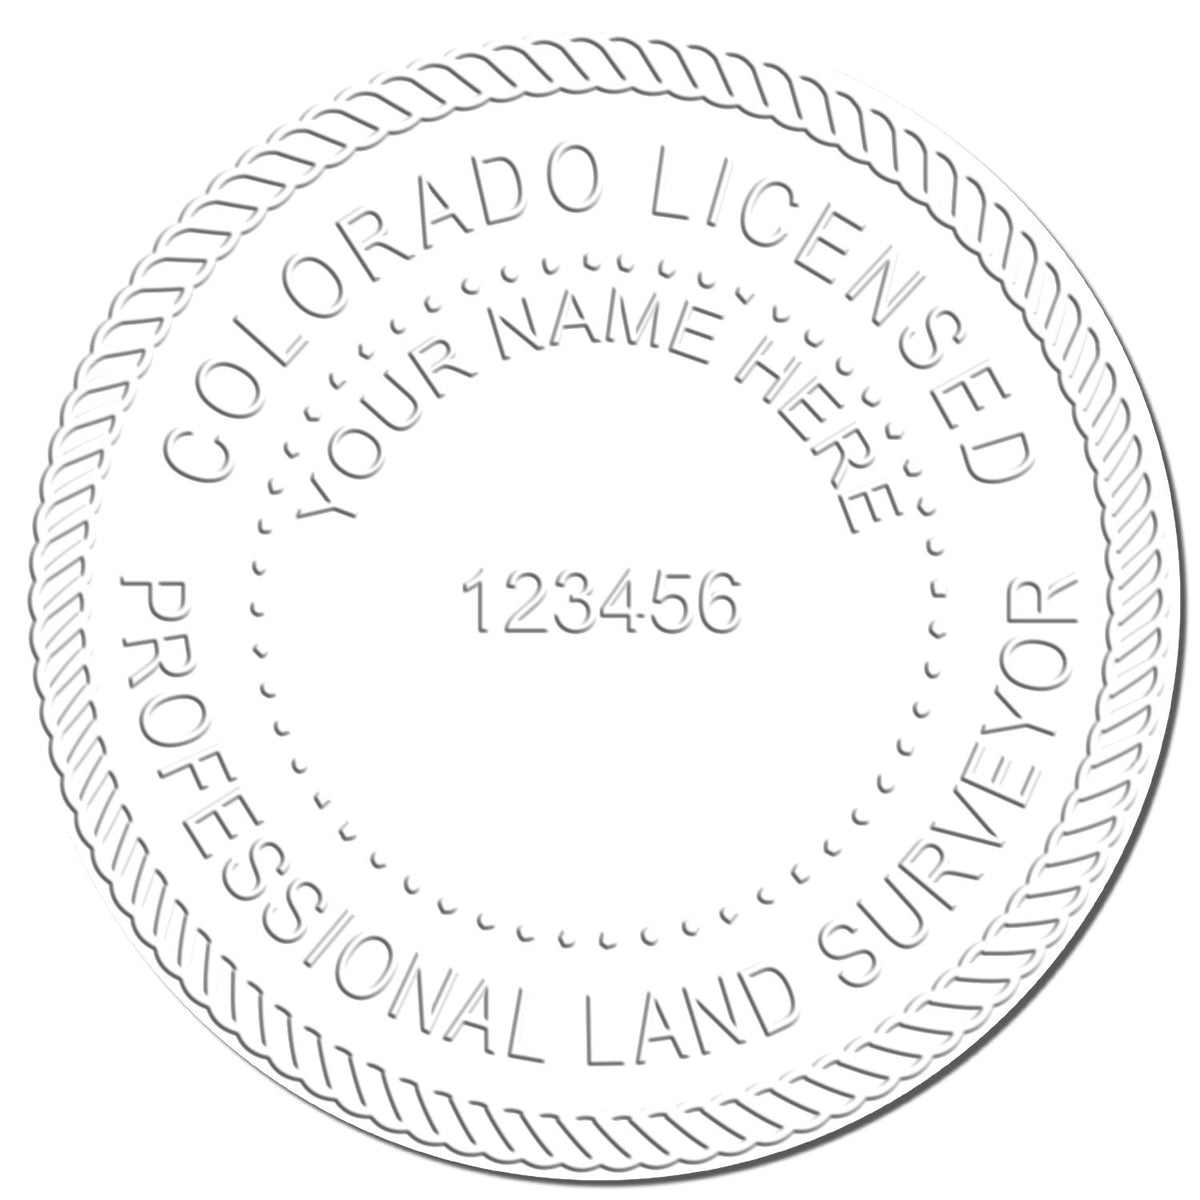 This paper is stamped with a sample imprint of the Gift Colorado Land Surveyor Seal, signifying its quality and reliability.